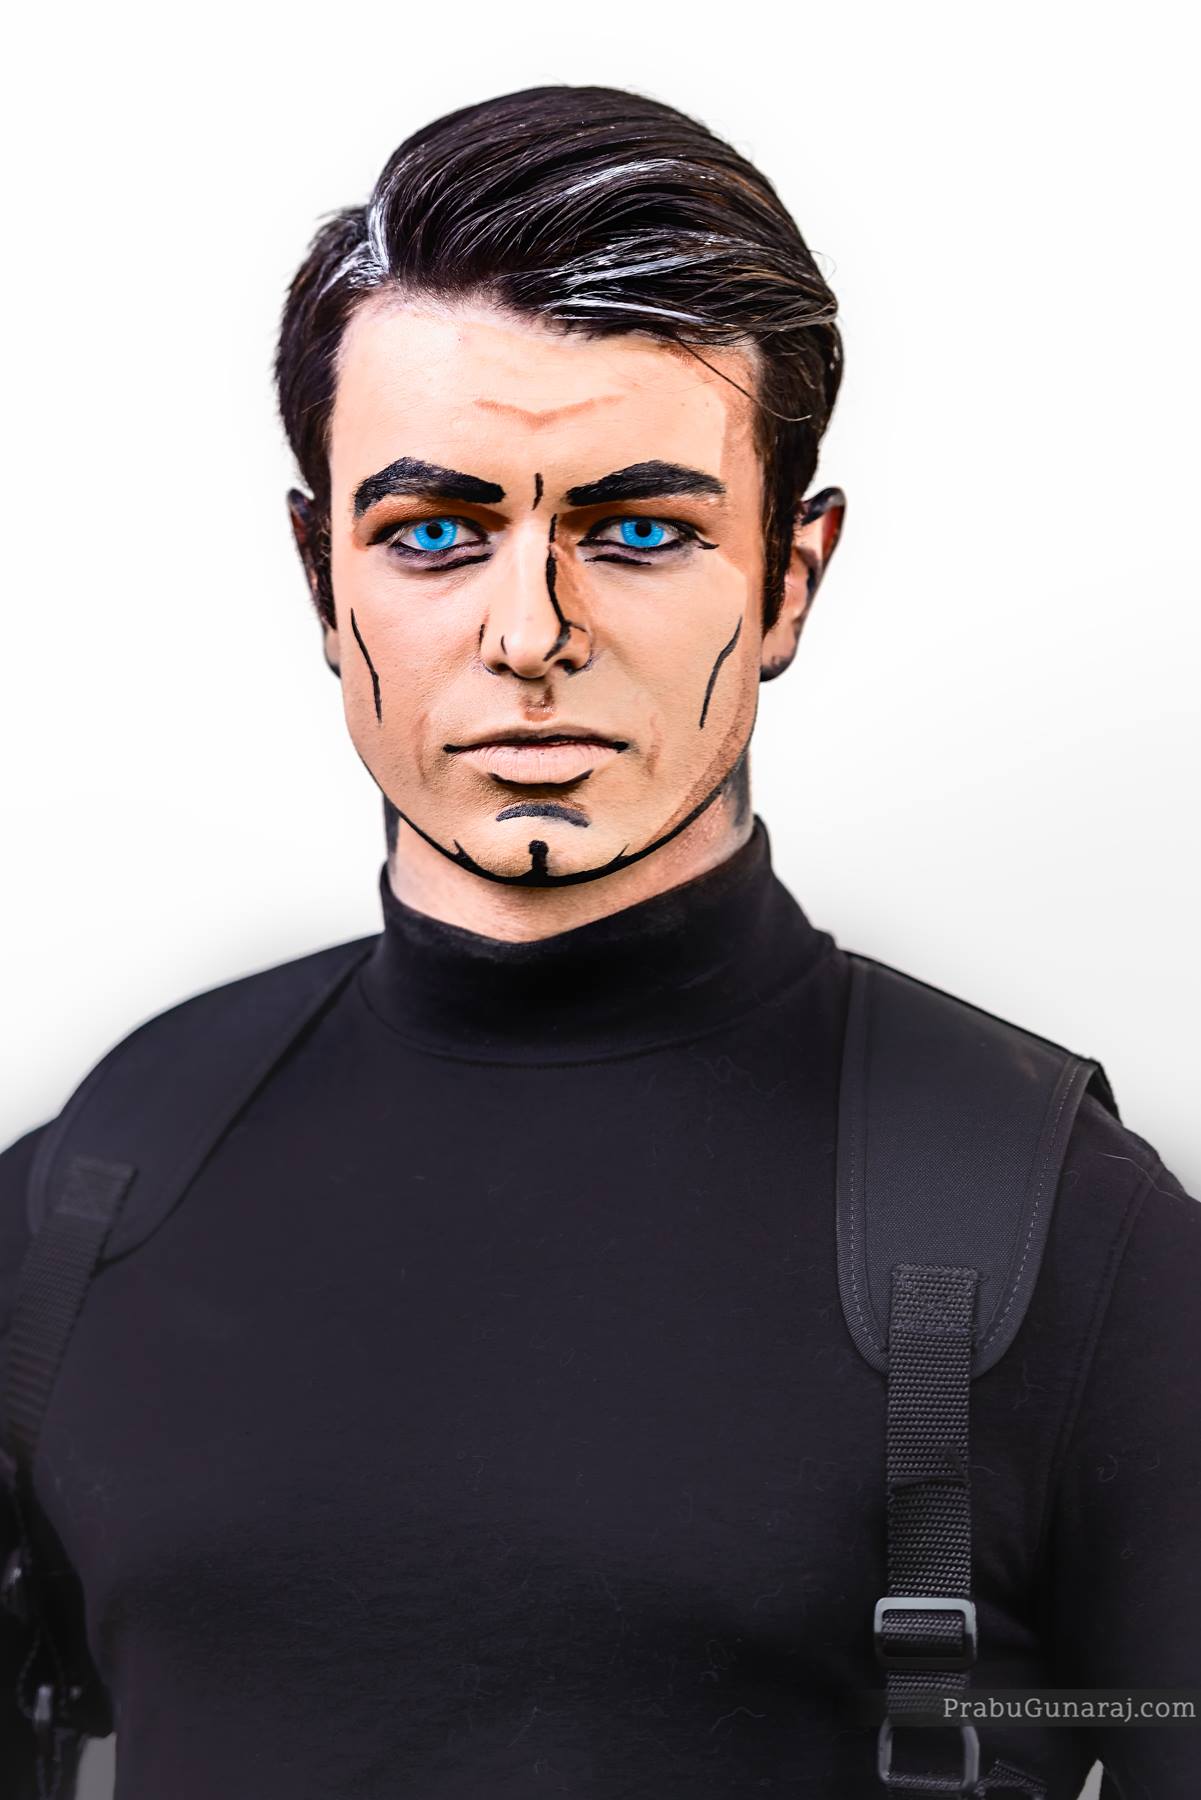 Do You Want Archer Cosplay? Because This Is How You Get Archer Cosplay.